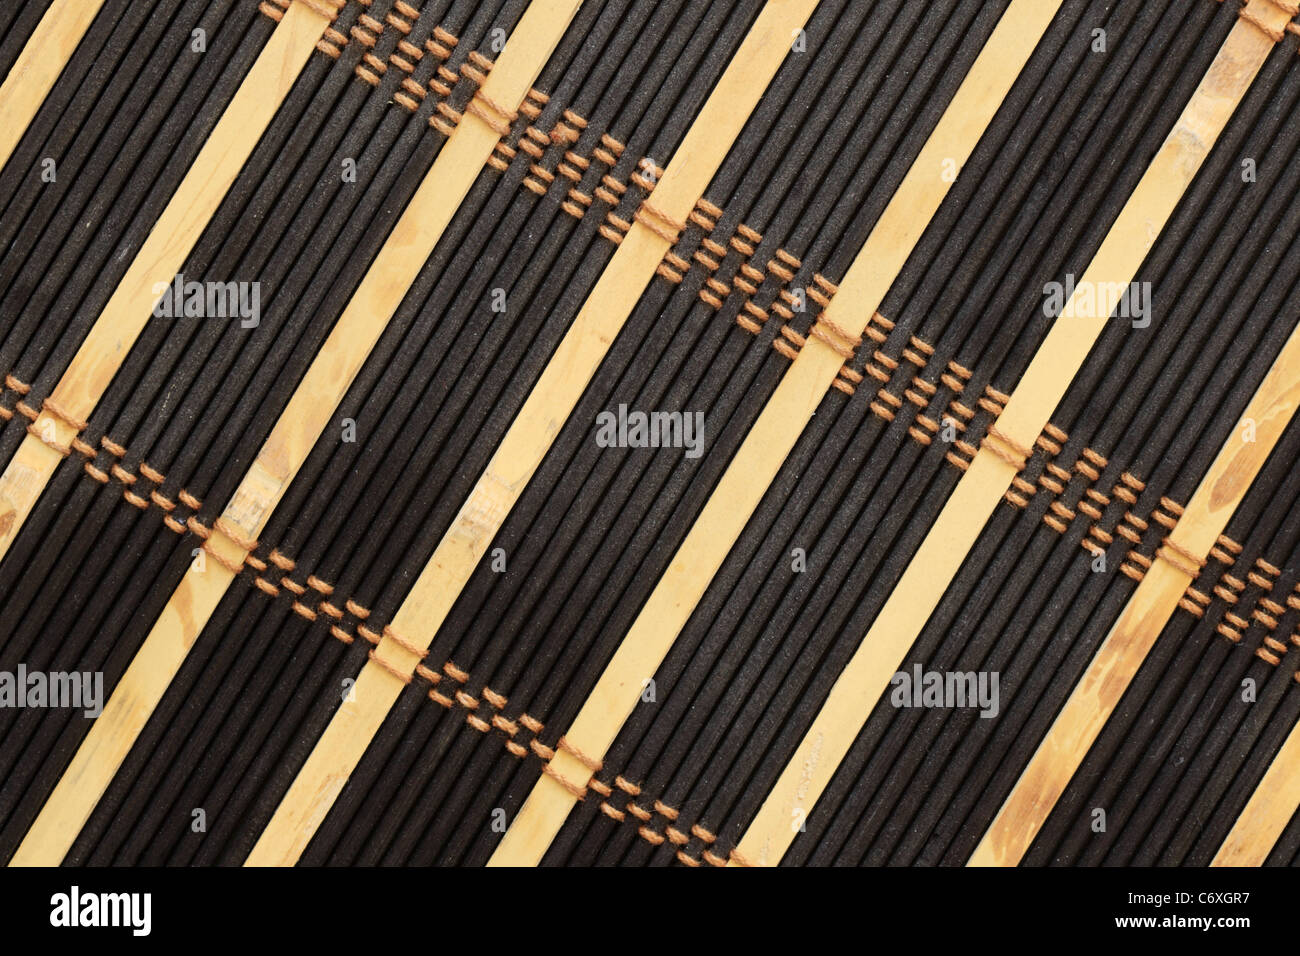 black and tan bamboo and string mat background Stock Photo